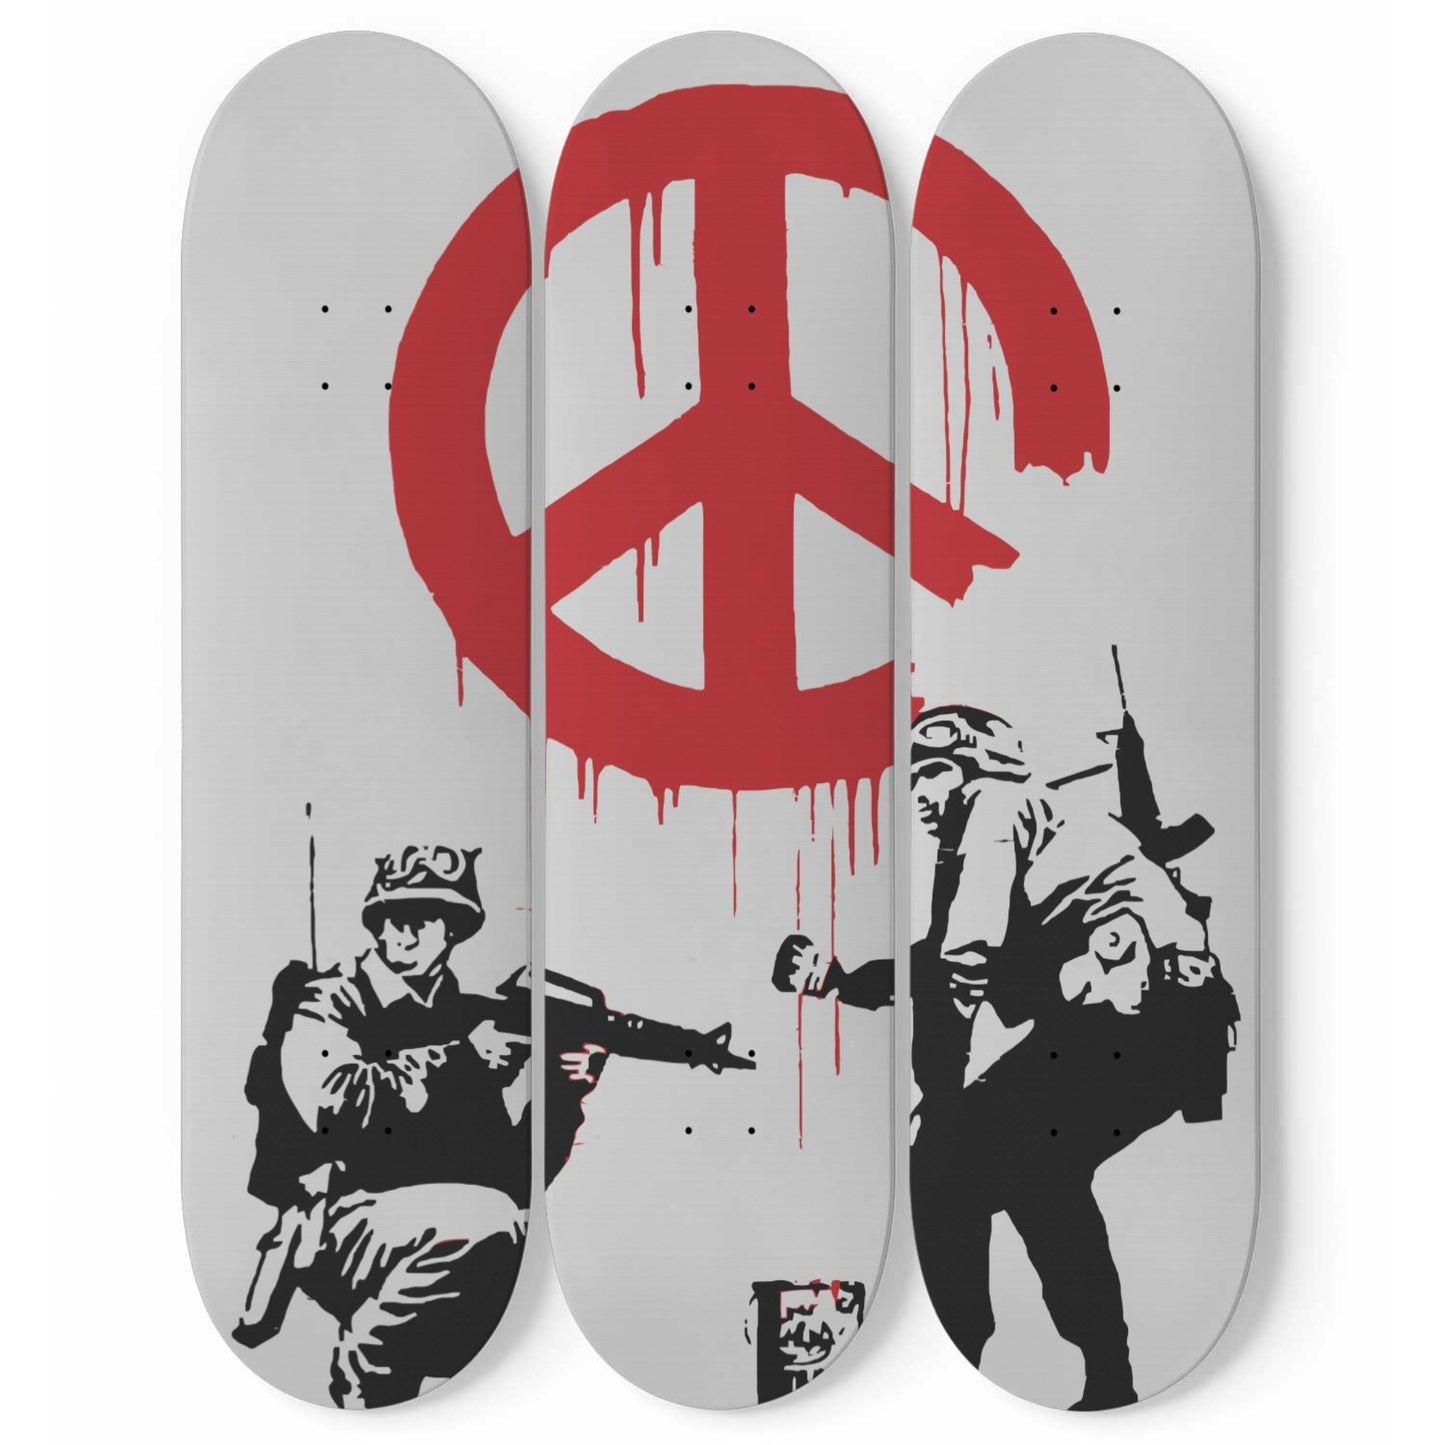 Peace Soldier 3 Set of Skateboard Deck Wall Art, Hanged Room Decoration, Custom Unique Gift